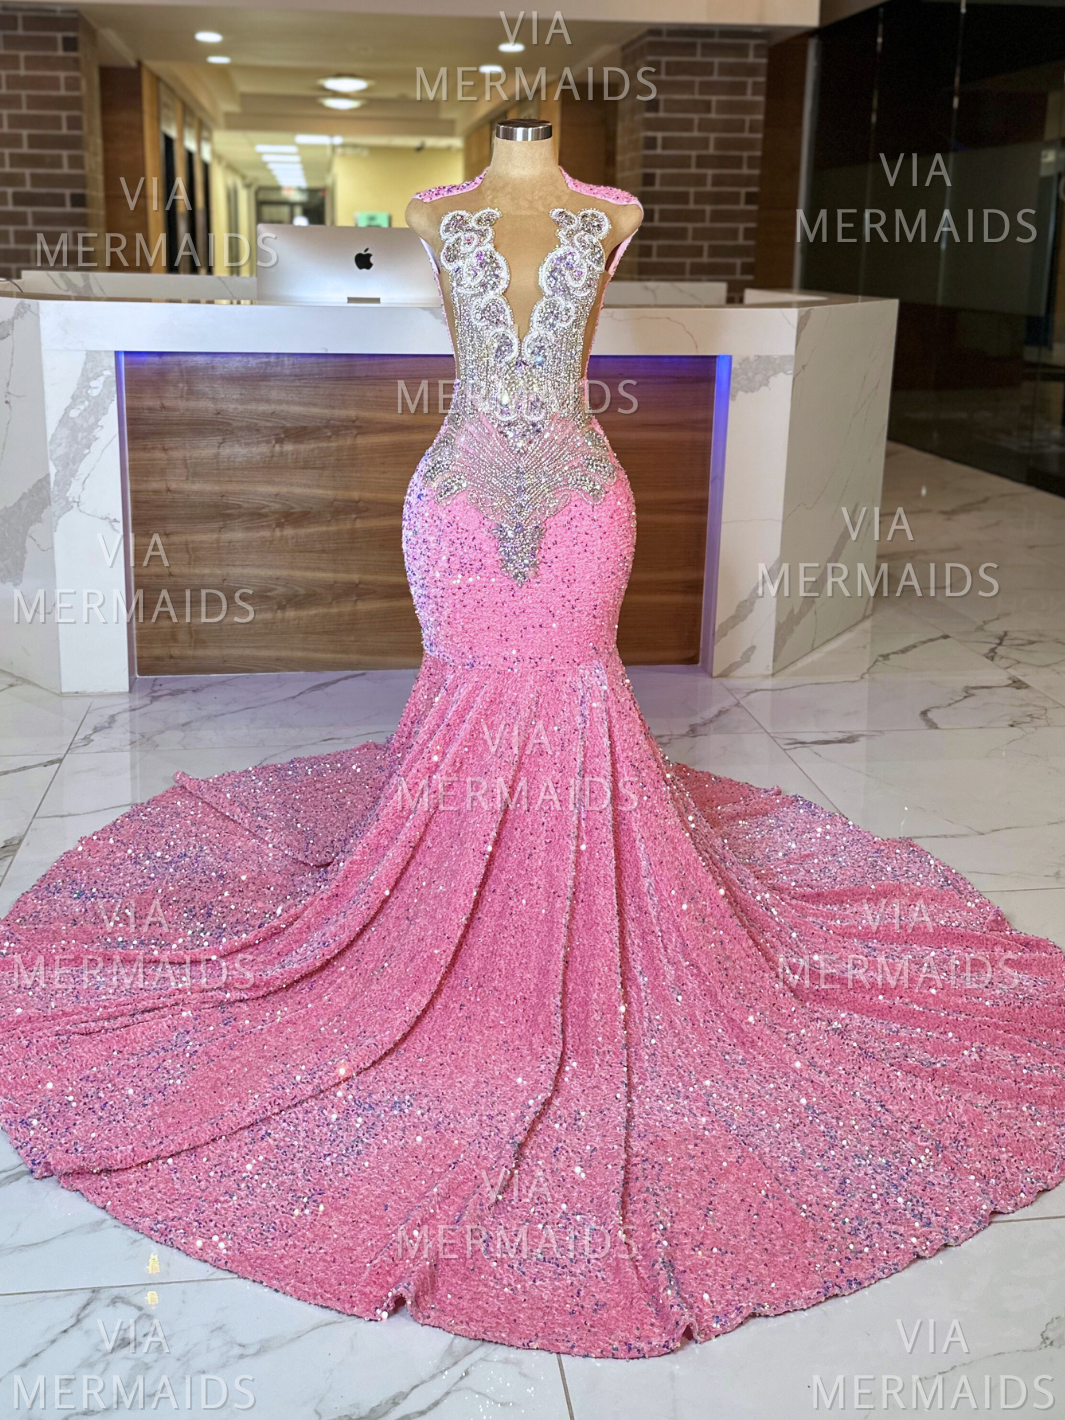 MICAH - Iridescent Pink Sequins Prom Dress with Iridscent Rhinestones PRE-ORDER-  SHIP ESTIMATED: 05/07